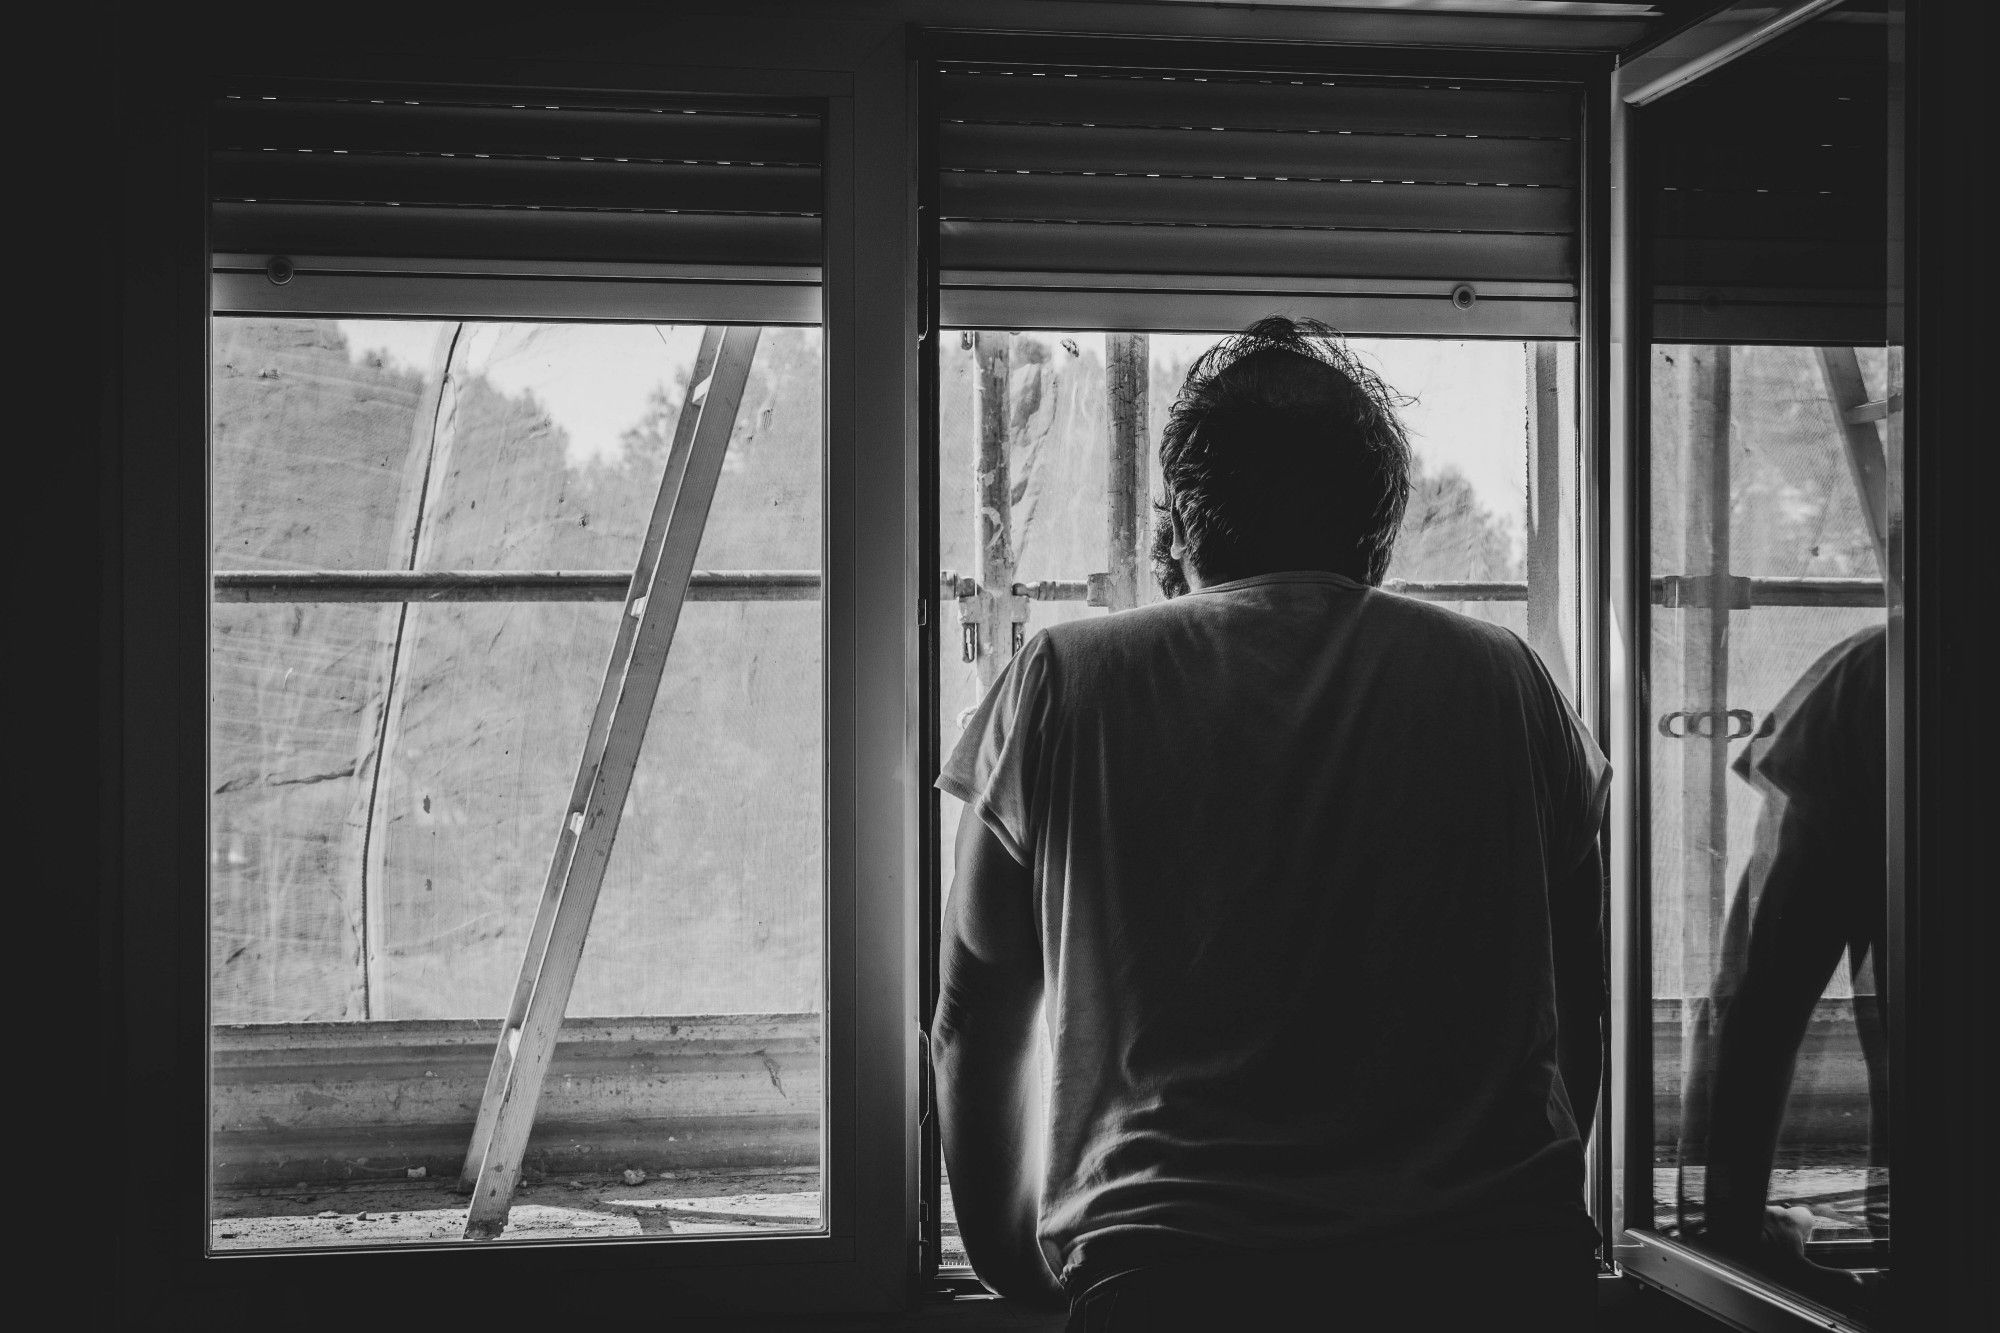 Man standing at a window. Seemingly lost in thought. In B&W.